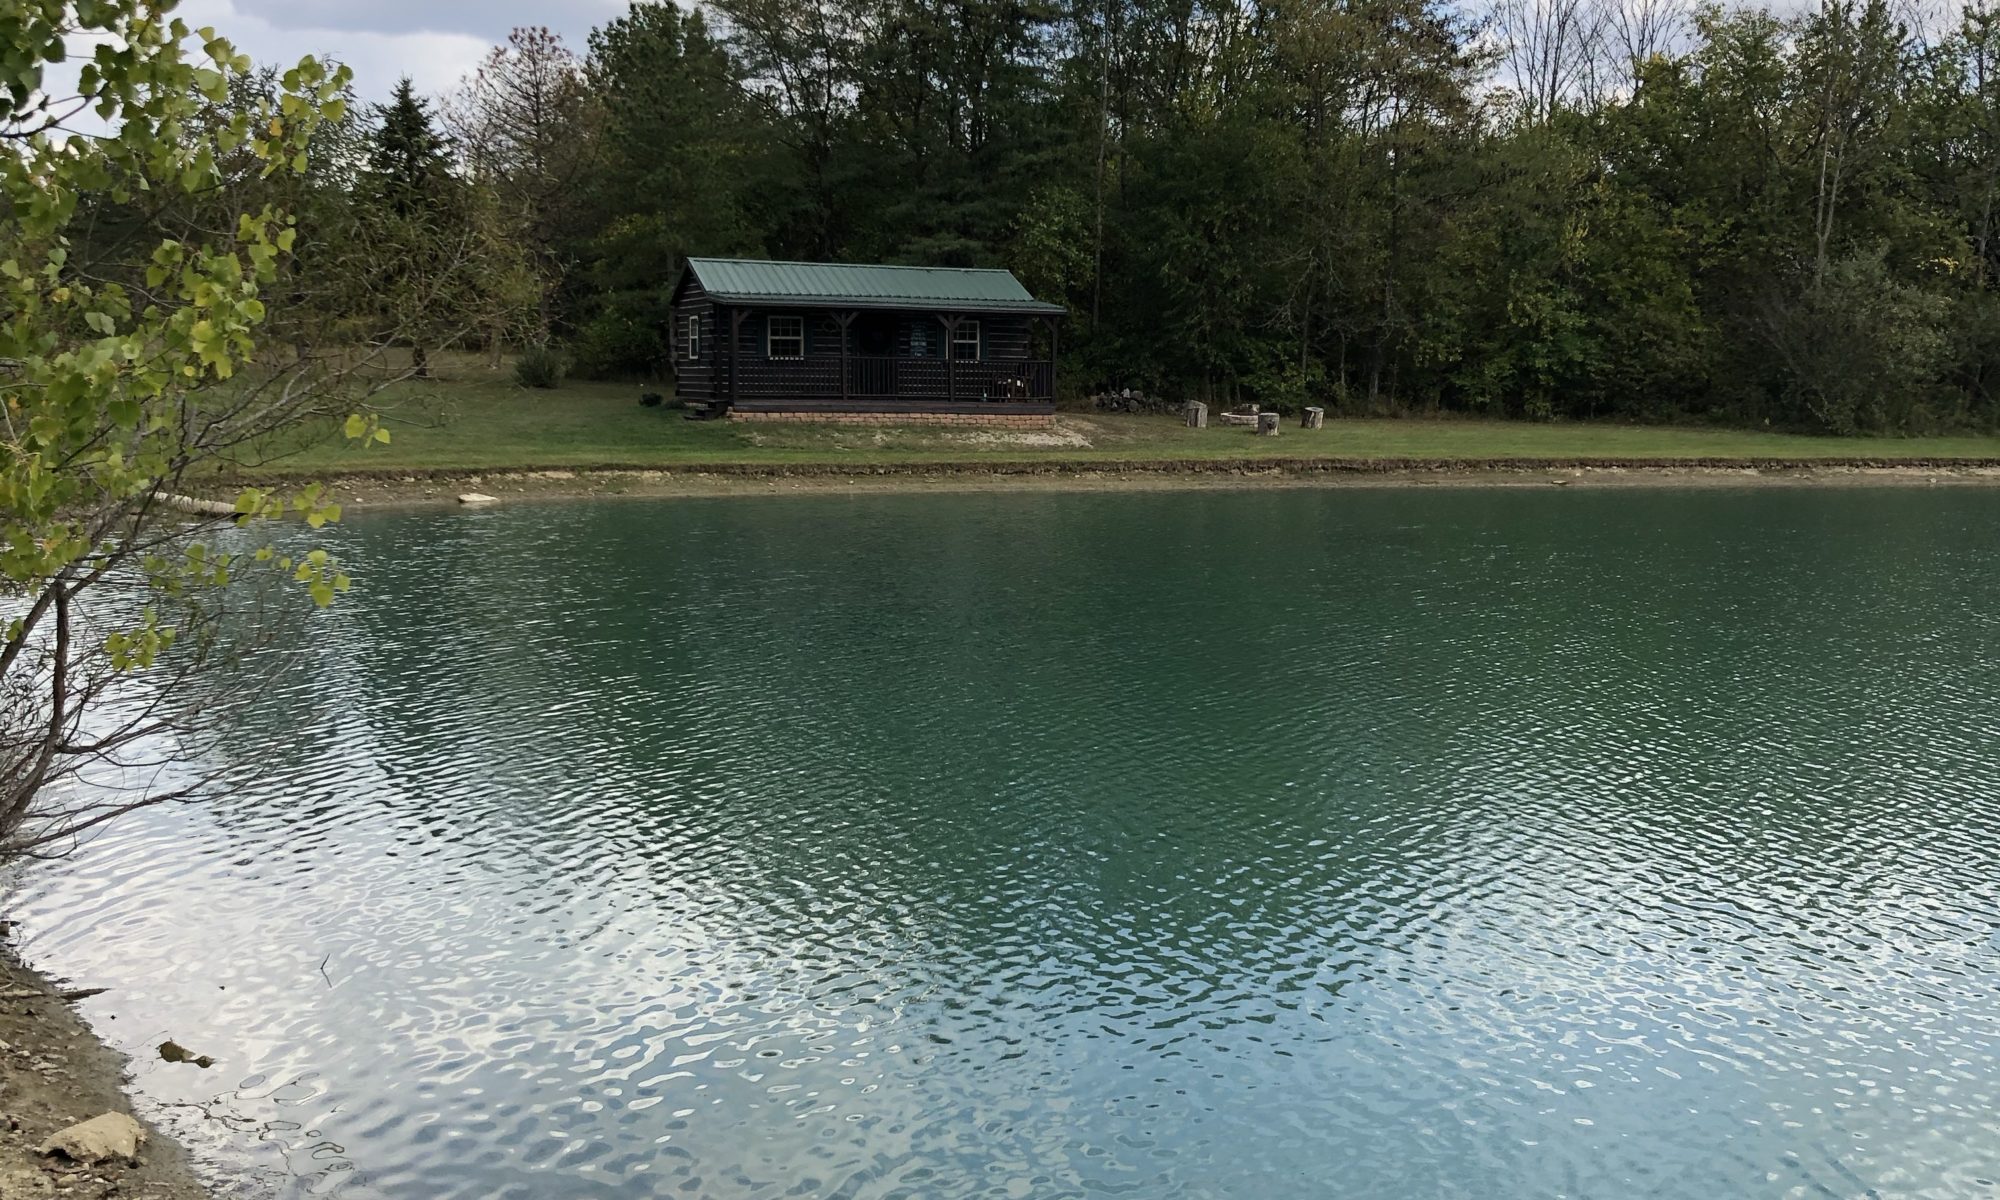 Photo of a lake and a cabin at Innkeeper Ministries, Lewisburg, Ohio